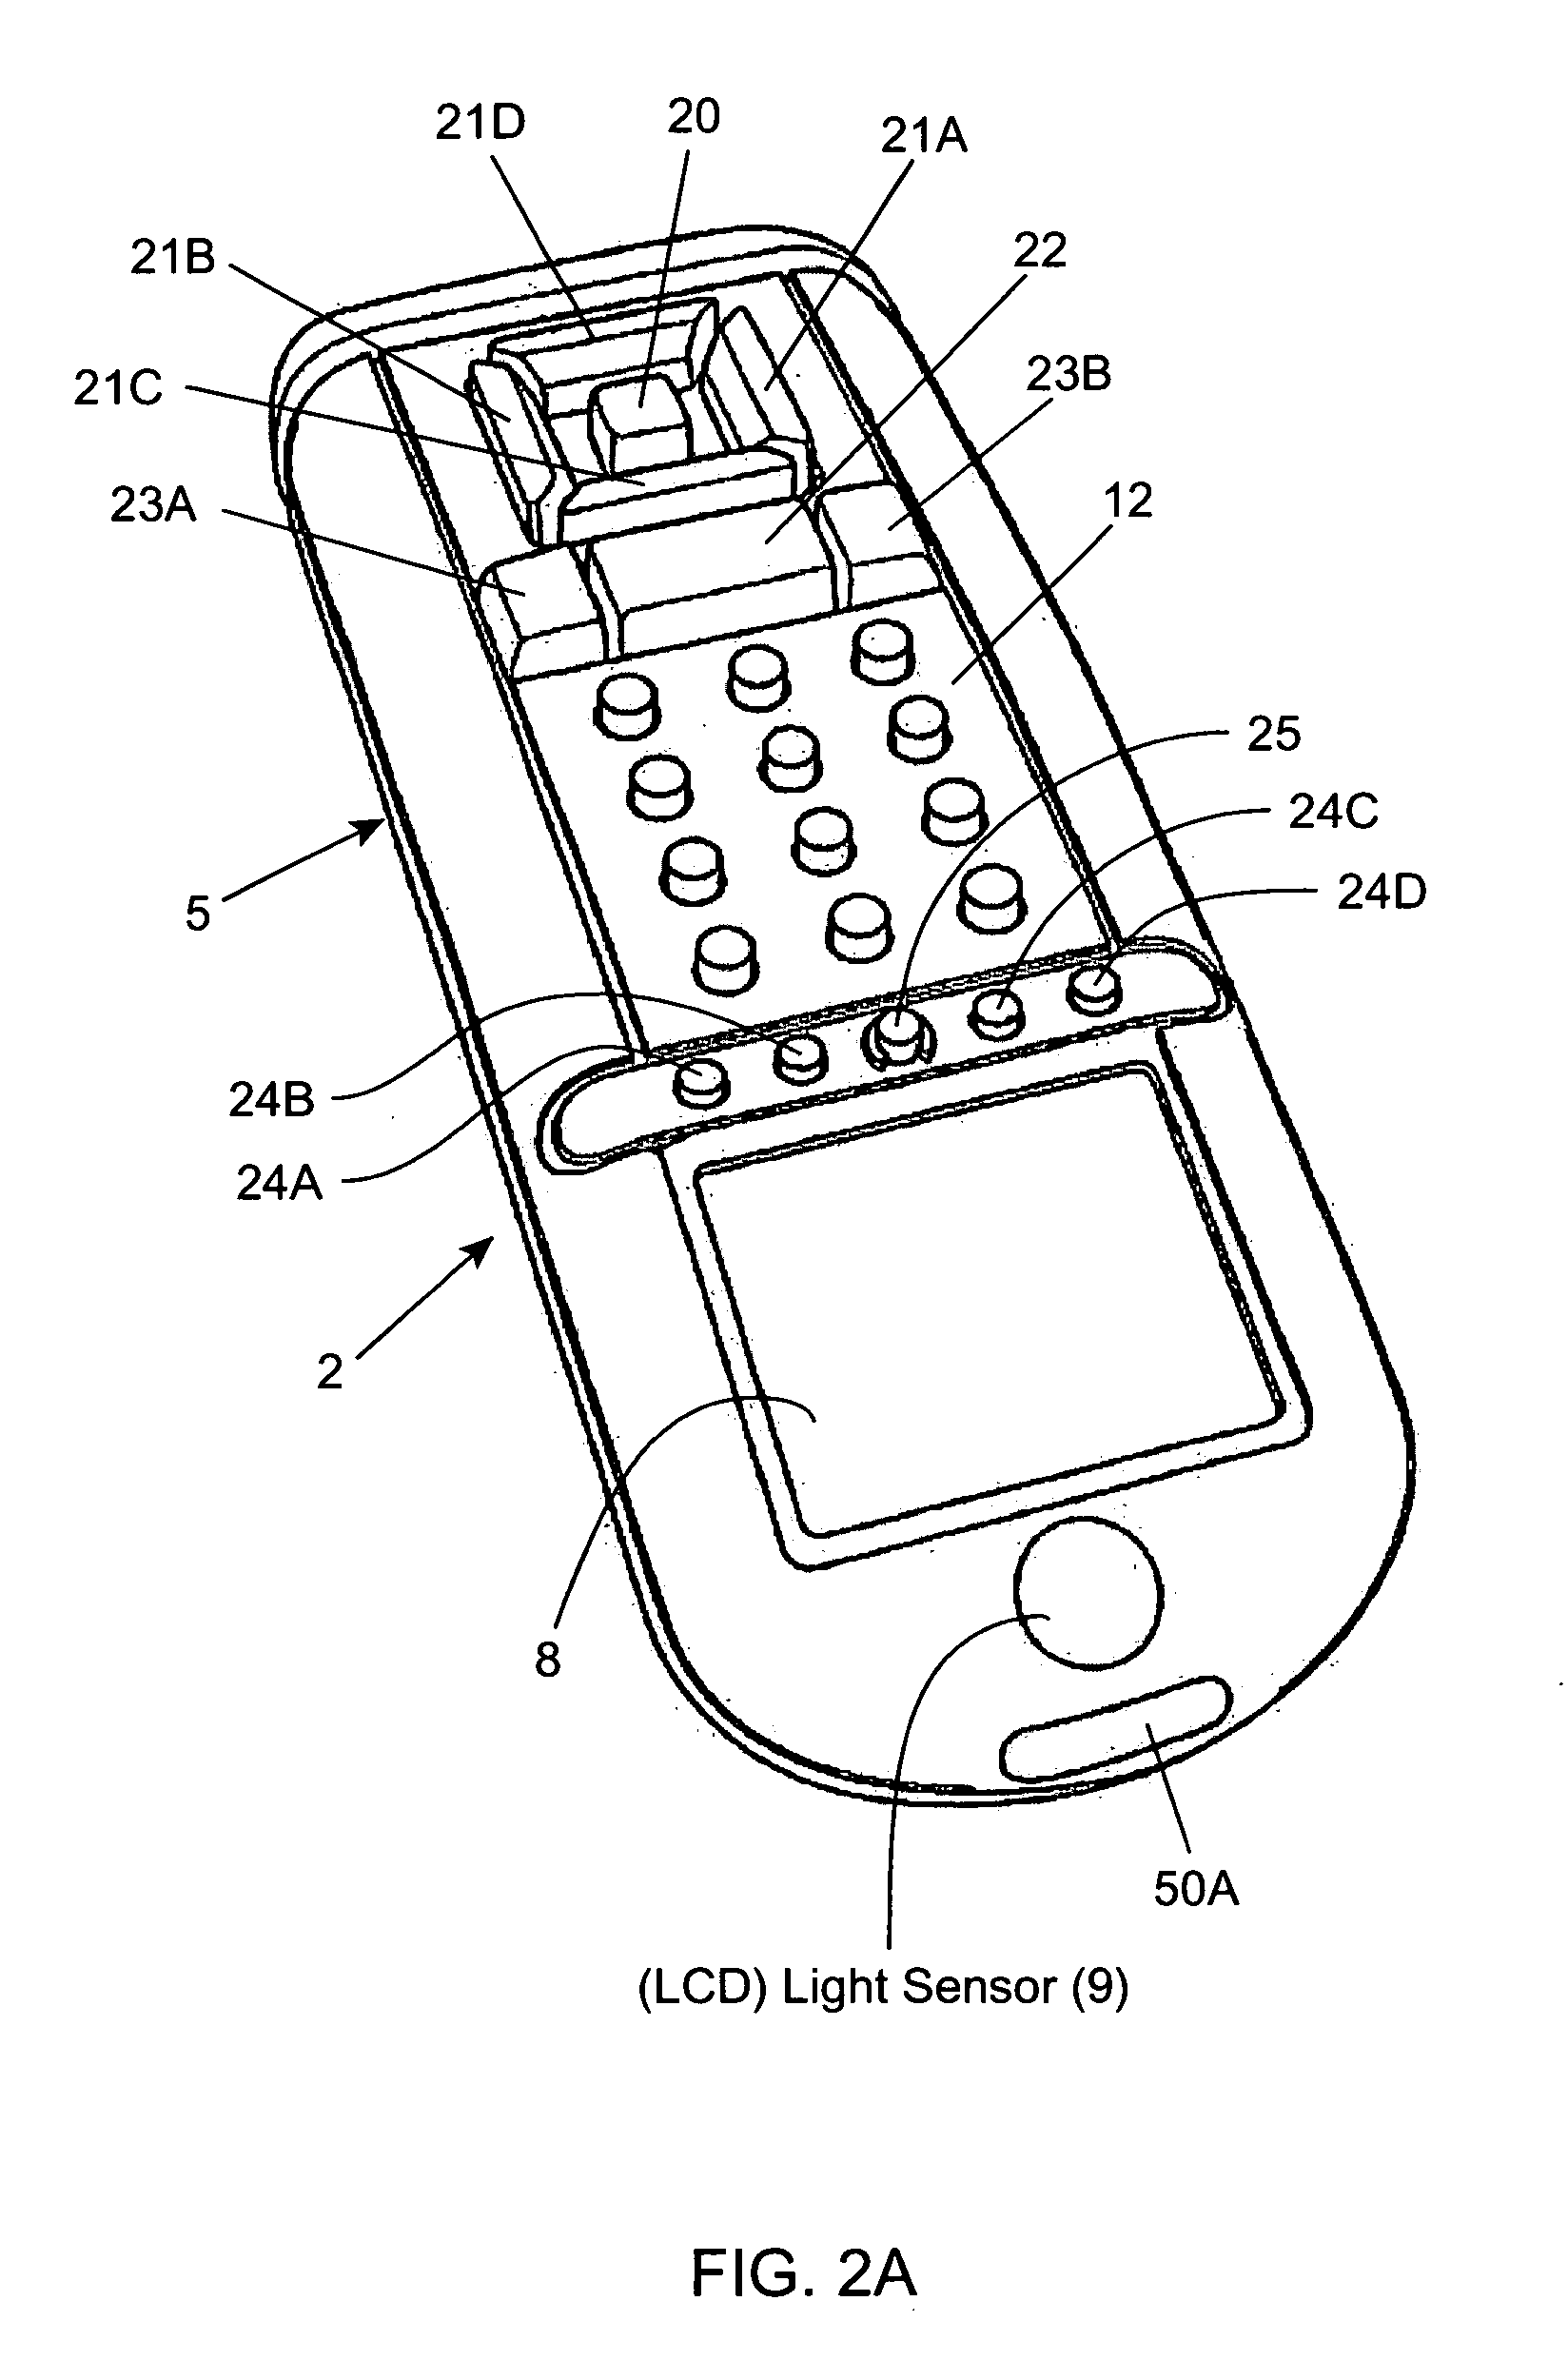 Wireless bar code symbol driven portable data terminal ( PDT) system adapted for single handed operation